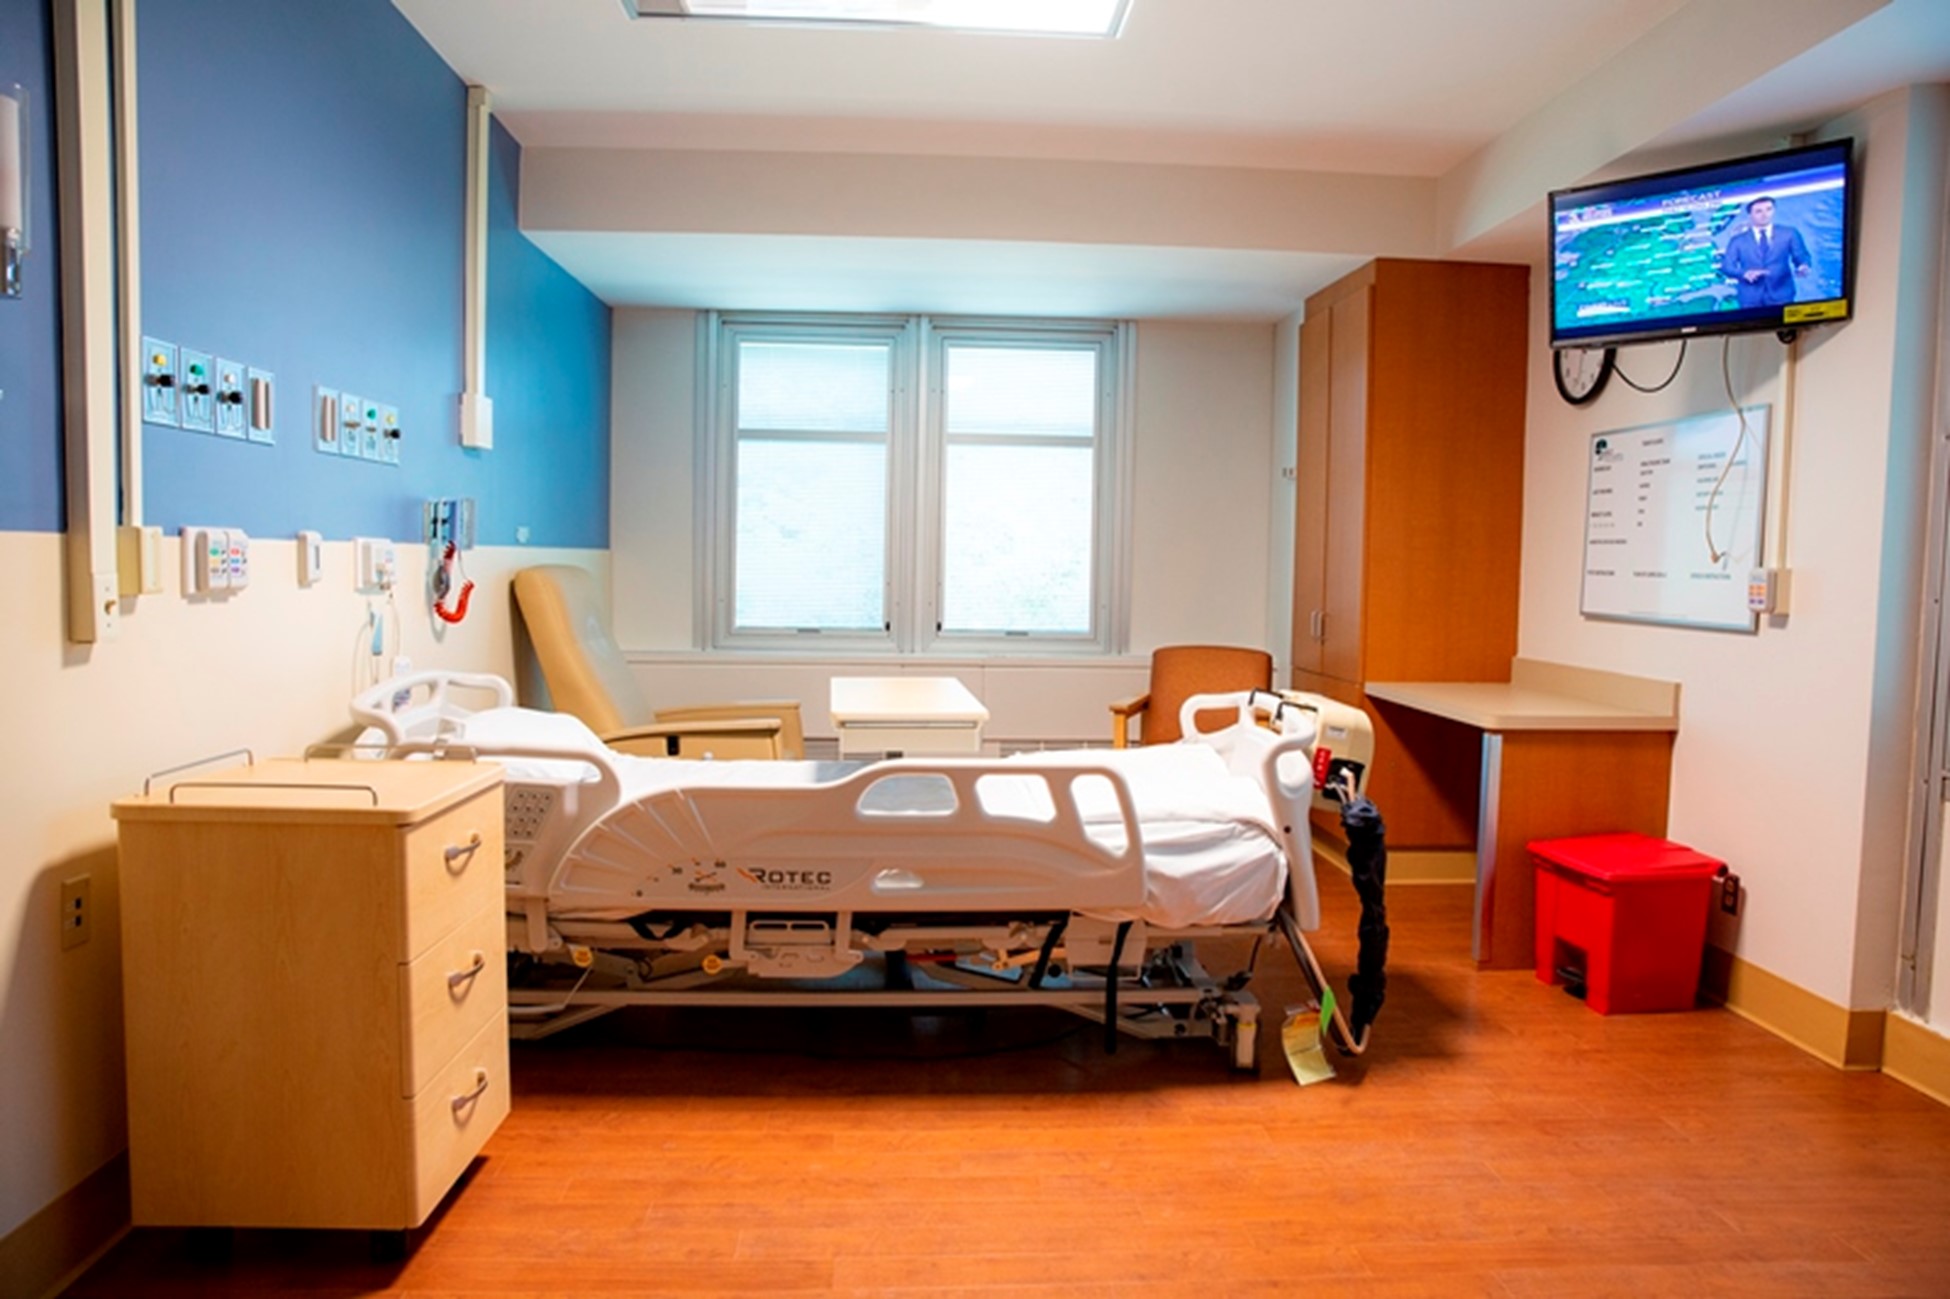 Select Specialty Hospital Room 2